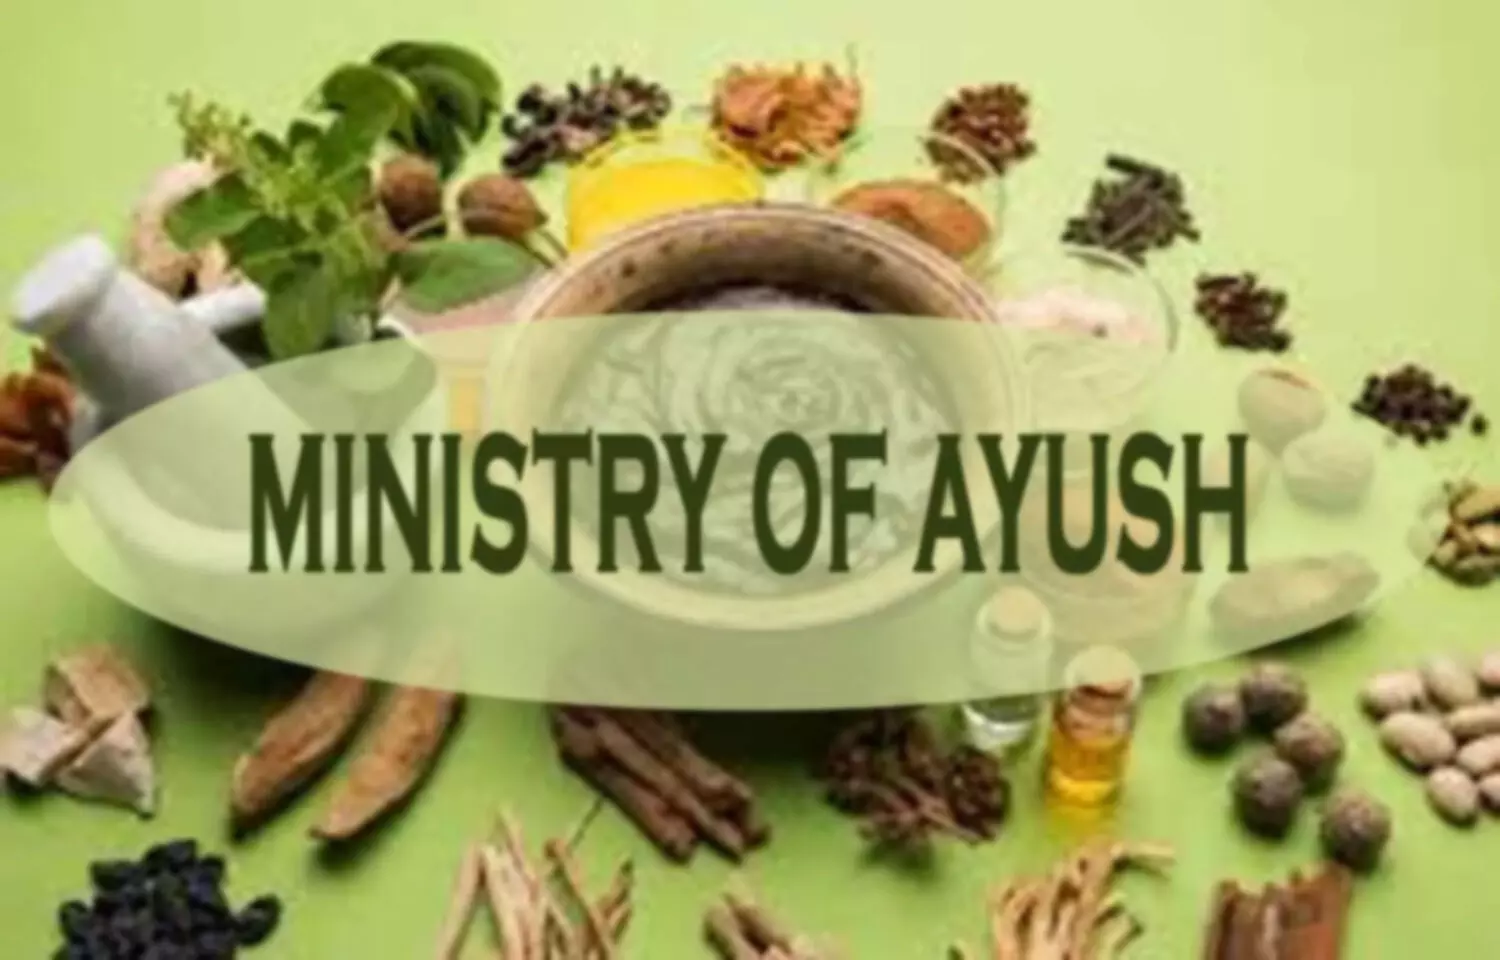 28 companies to invest 6000 crores in Ayush sector